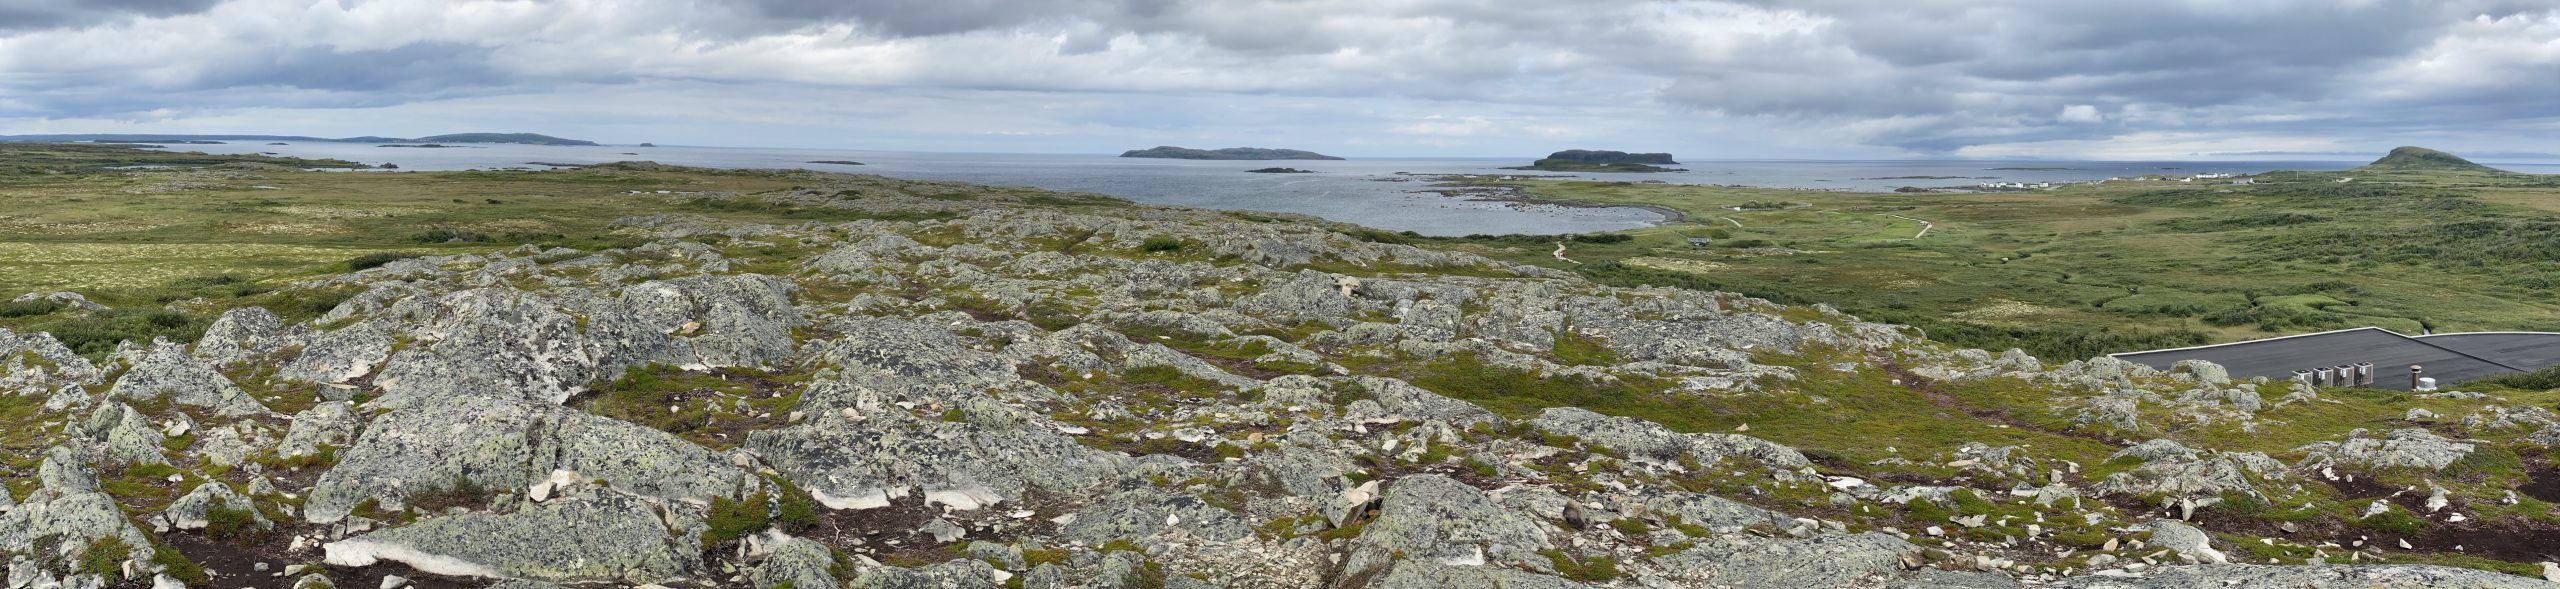 A panoramic view of the L’Anse aux Meadows UNESCO historical site. The Norse archeological site is right of center.